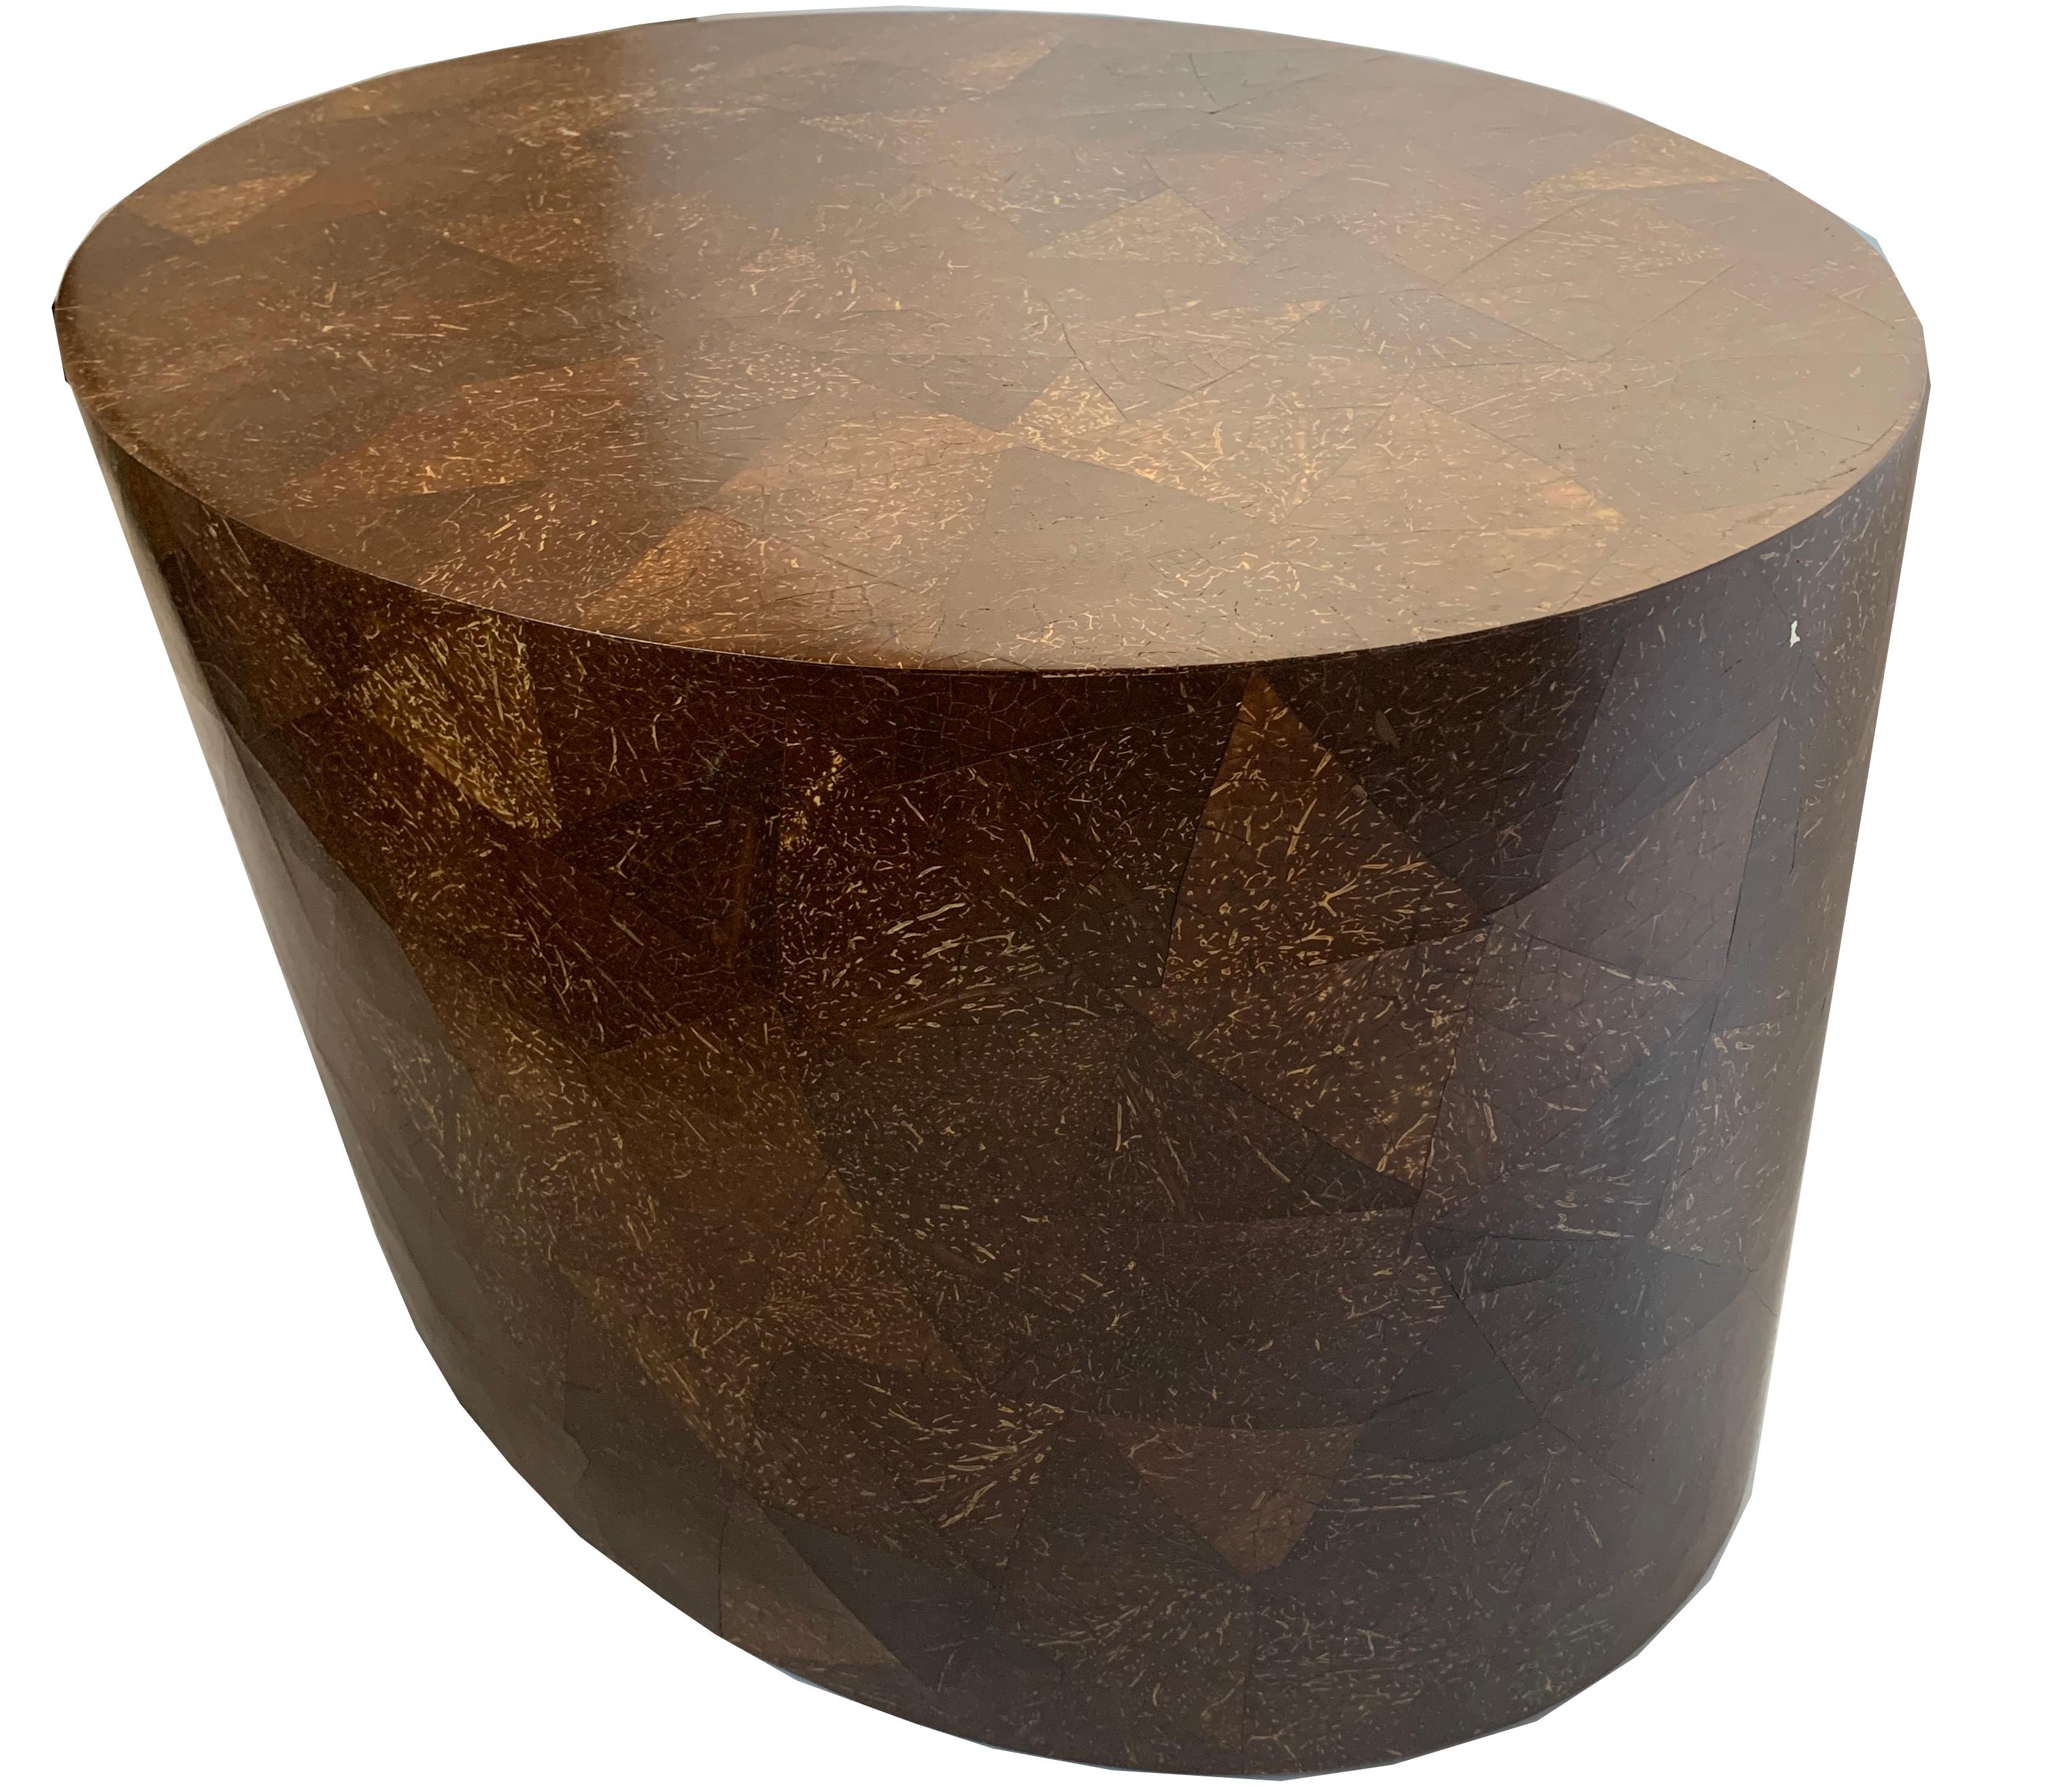 Pair of oval nesting tables designed by Juan Montoya. Made from crushed coconut shells in a clear finish.

Property from esteemed interior designer Juan Montoya. Juan Montoya is one of the most acclaimed and prolific interior designers in the world